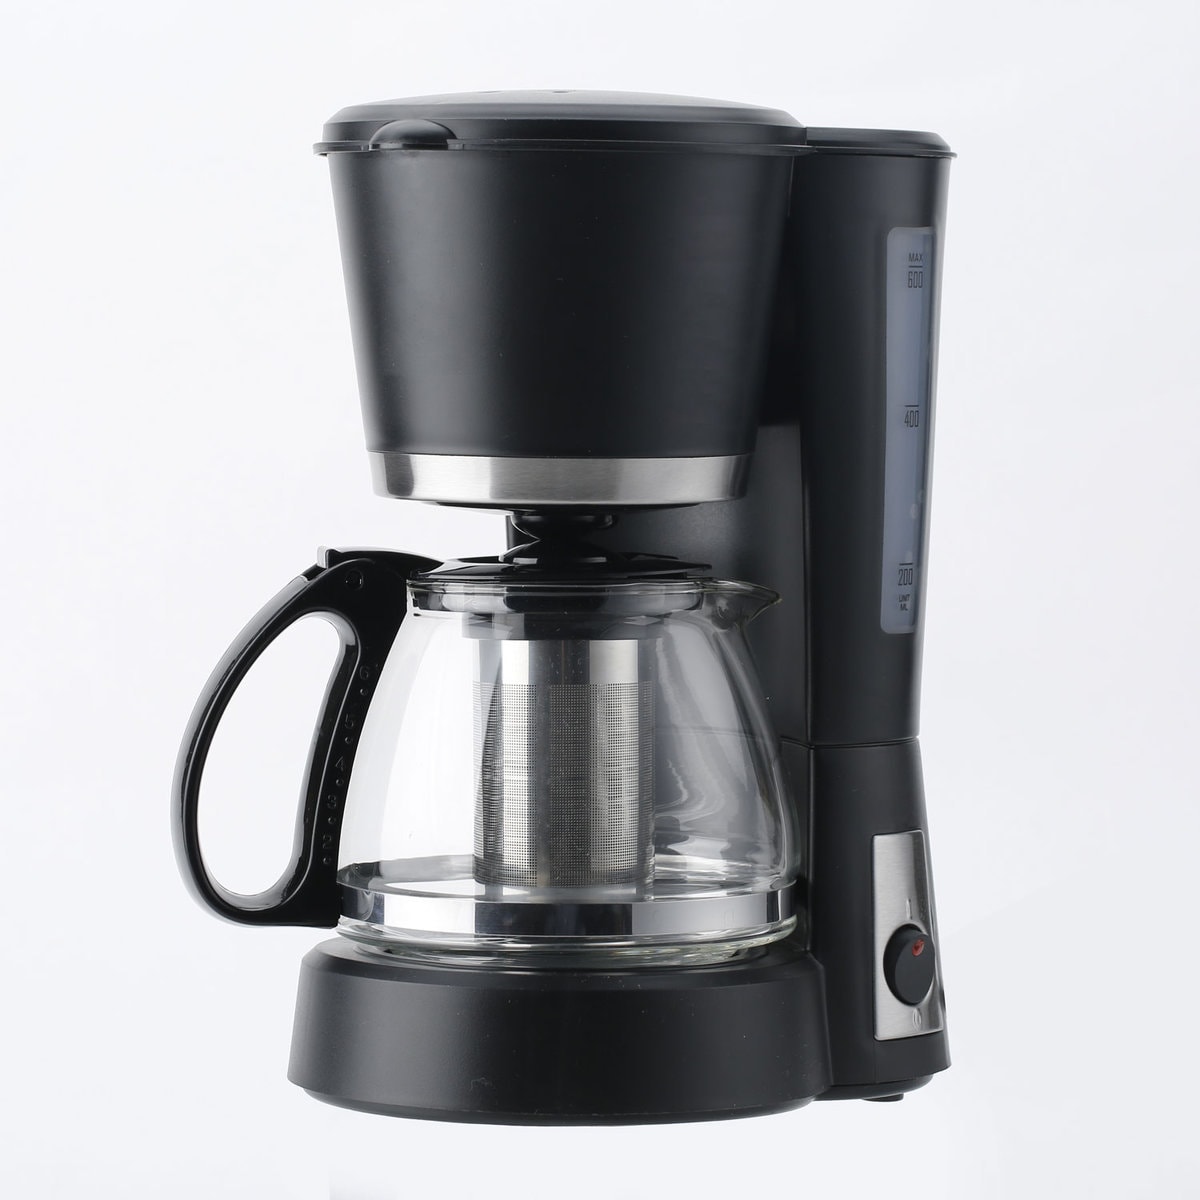 A modern coffee maker on a white background